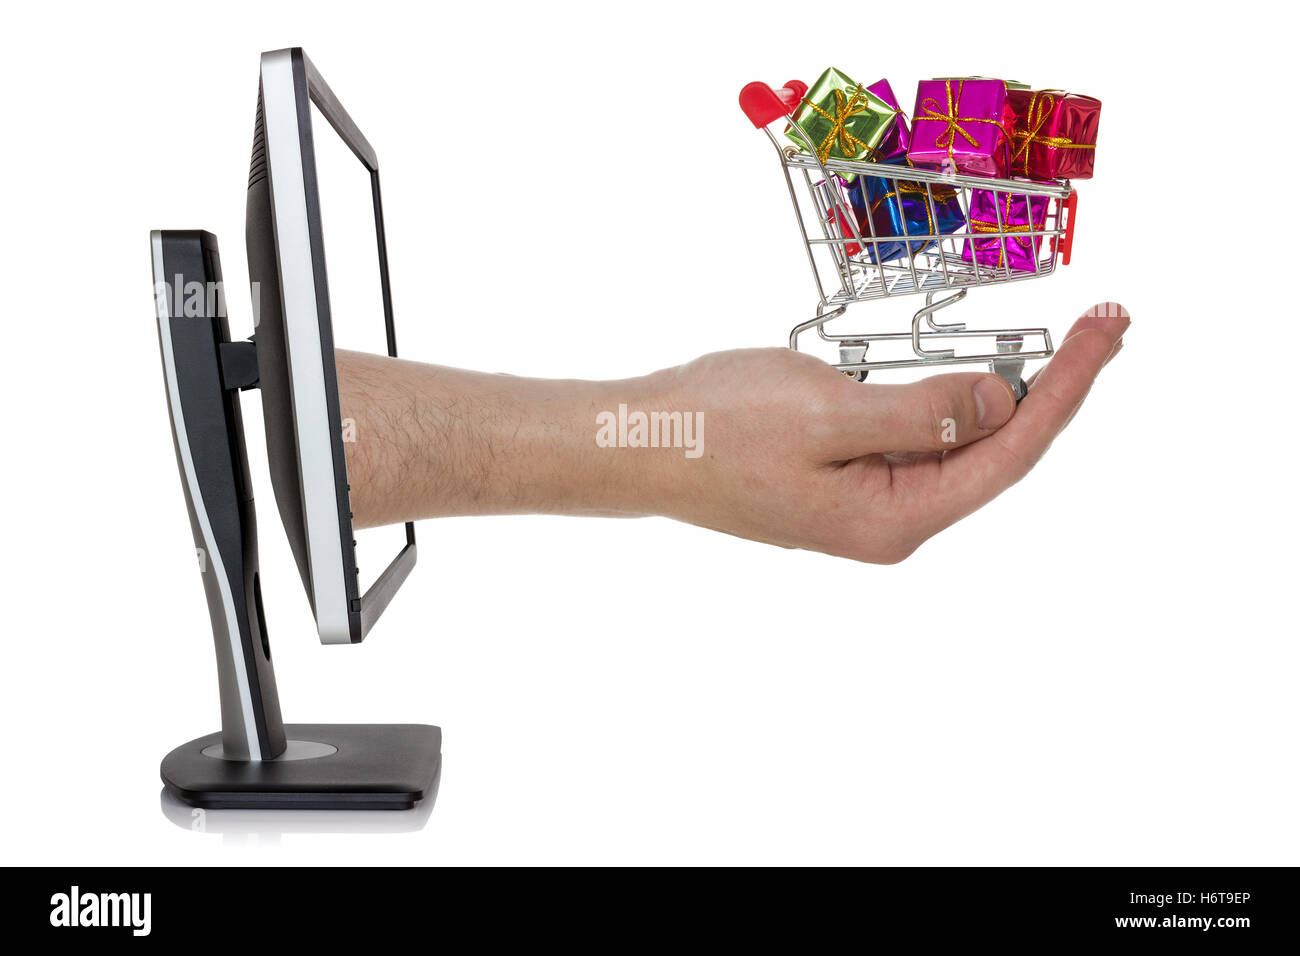 present, isolated, basket, monitor, business dealings, deal, business Stock Photo